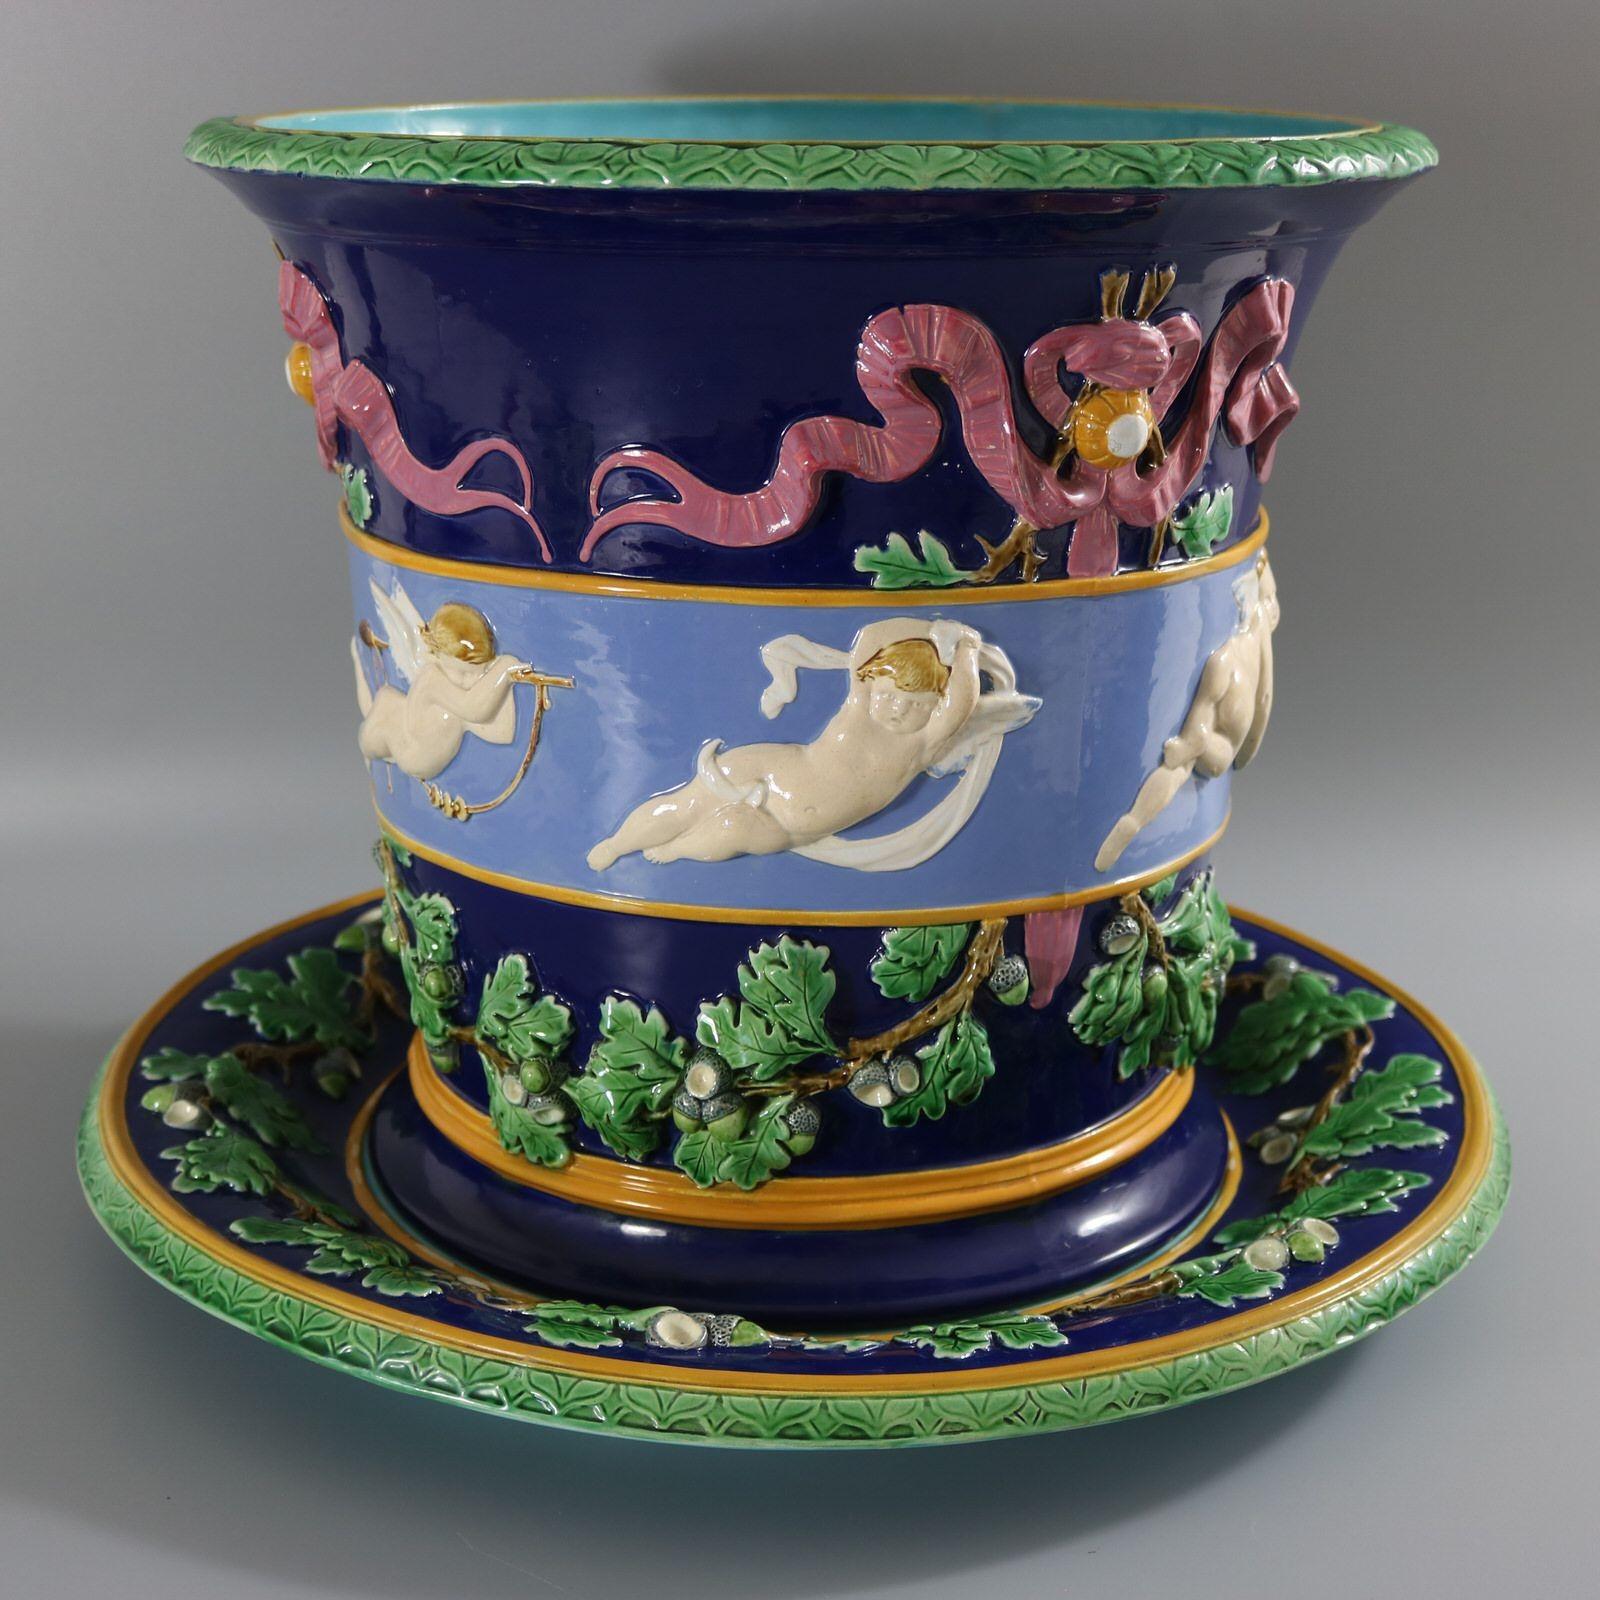 Minton Majolica jardinière and stand which features cupids in flight in various poses, around the central band. Ribbons above, oak leaves and acorns below. Colouration: cobalt blue, lavender blue, green, are predominant. The piece bears maker's